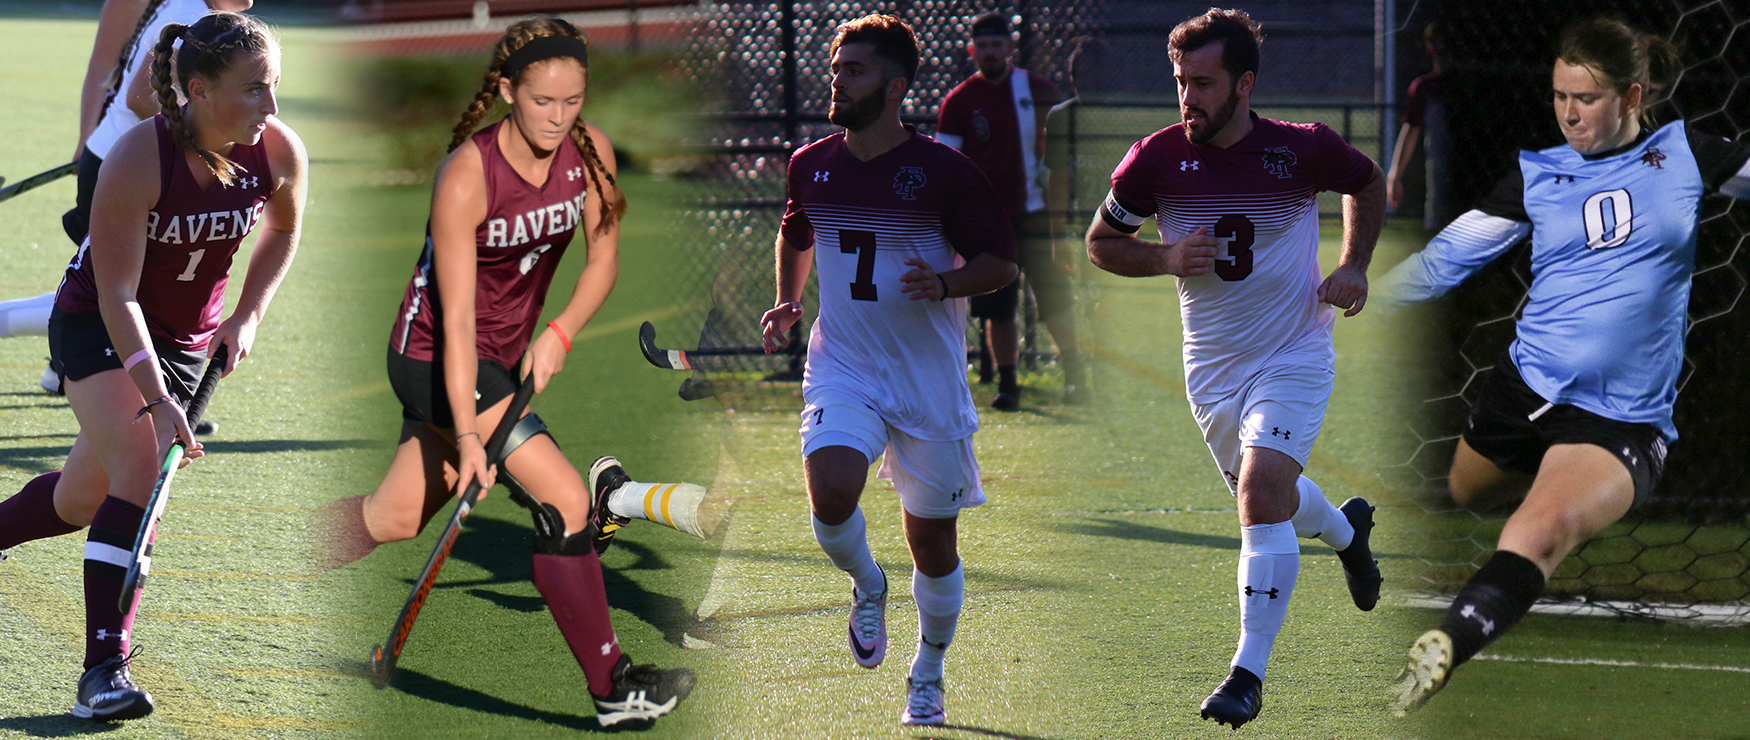 NE10 Academic All-Conference selections